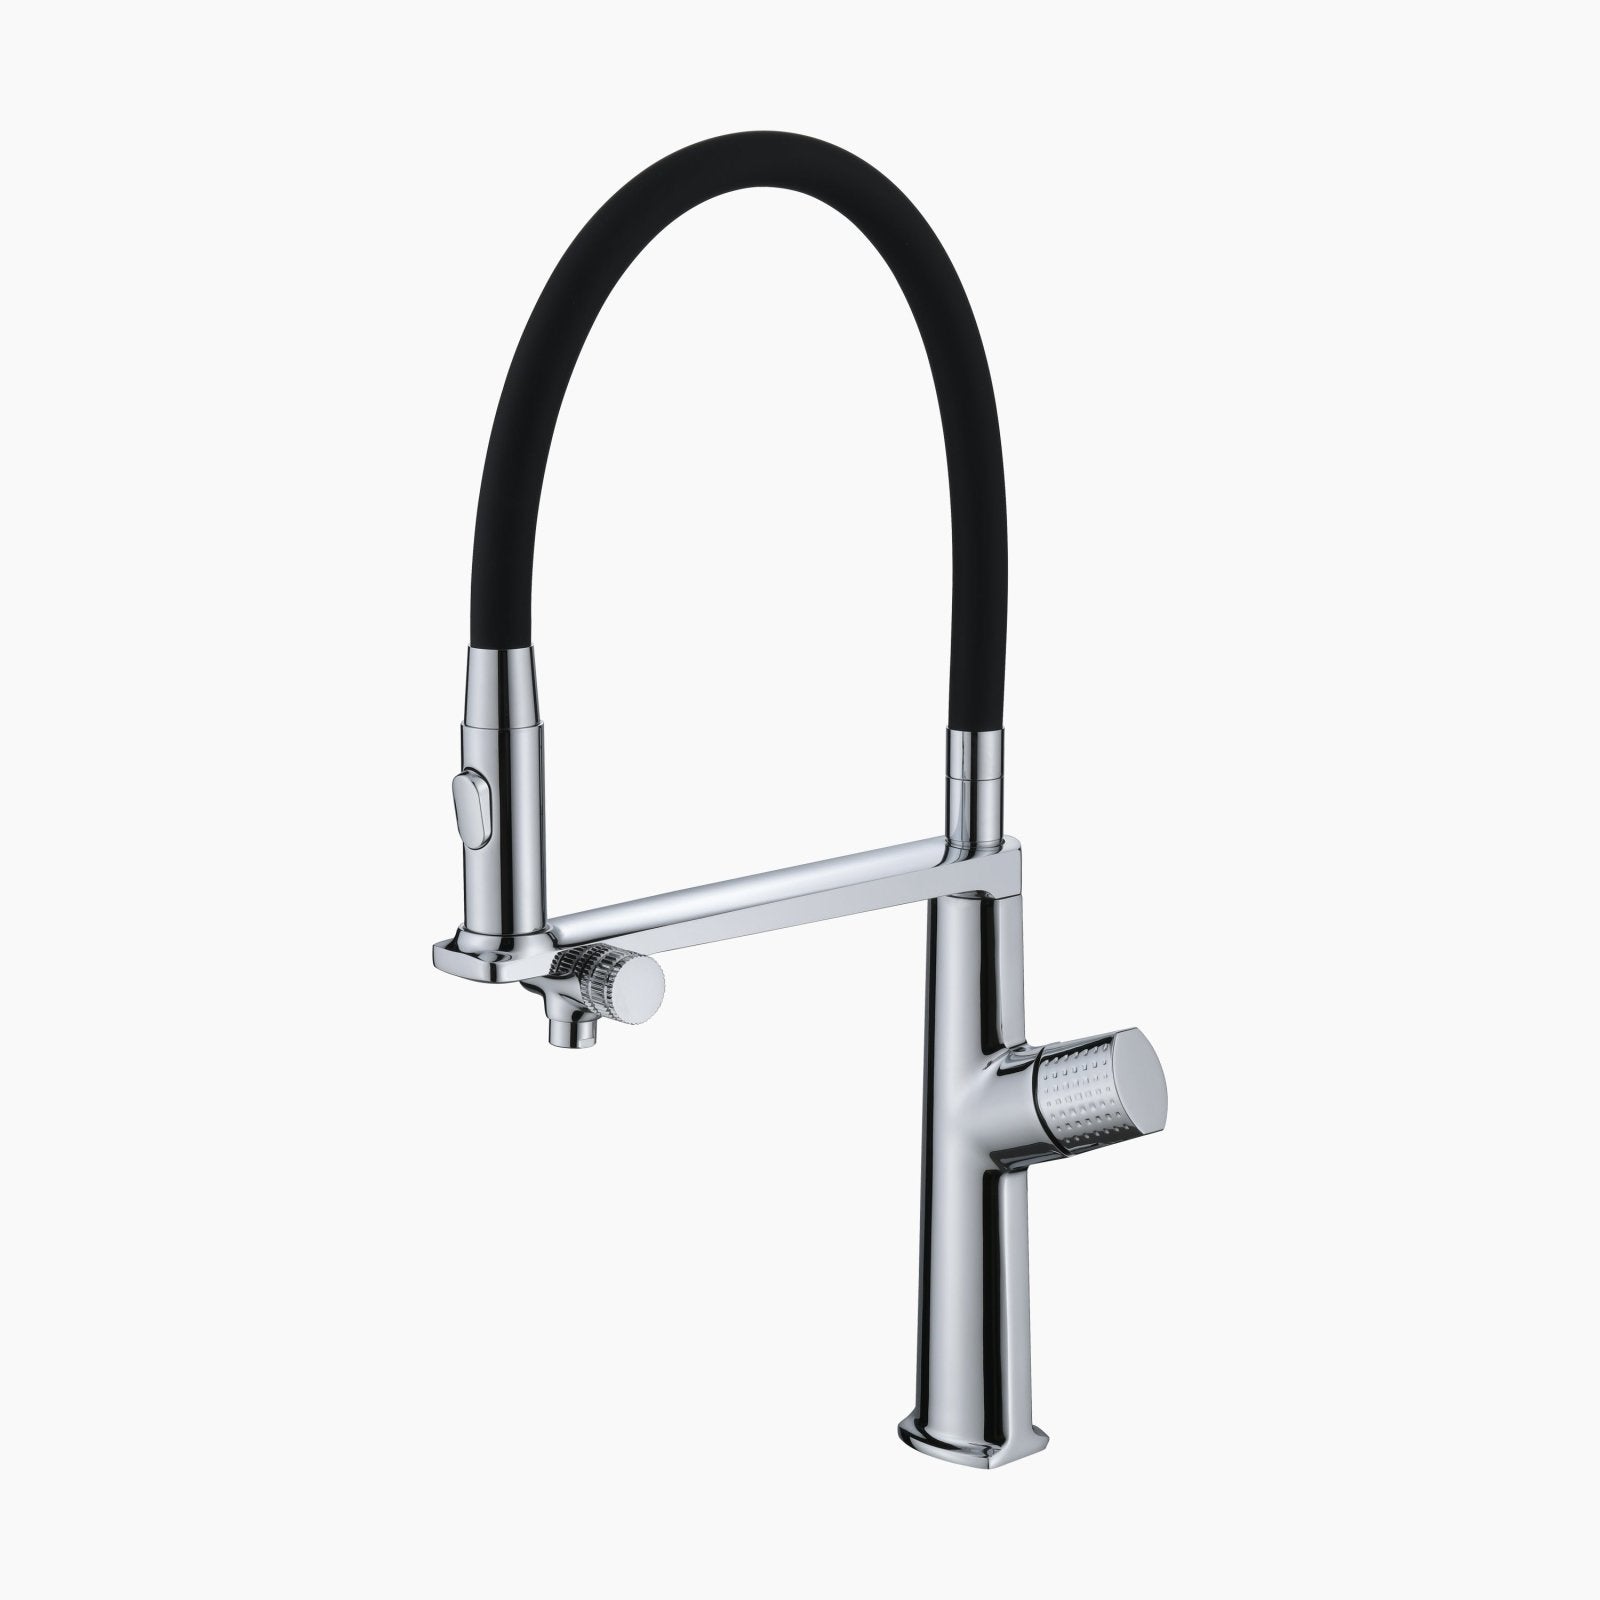 Lefton Copper Kitchen Pull-Down Faucet with Water Filter-KF2208 -Kitchen Faucets- Lefton Home